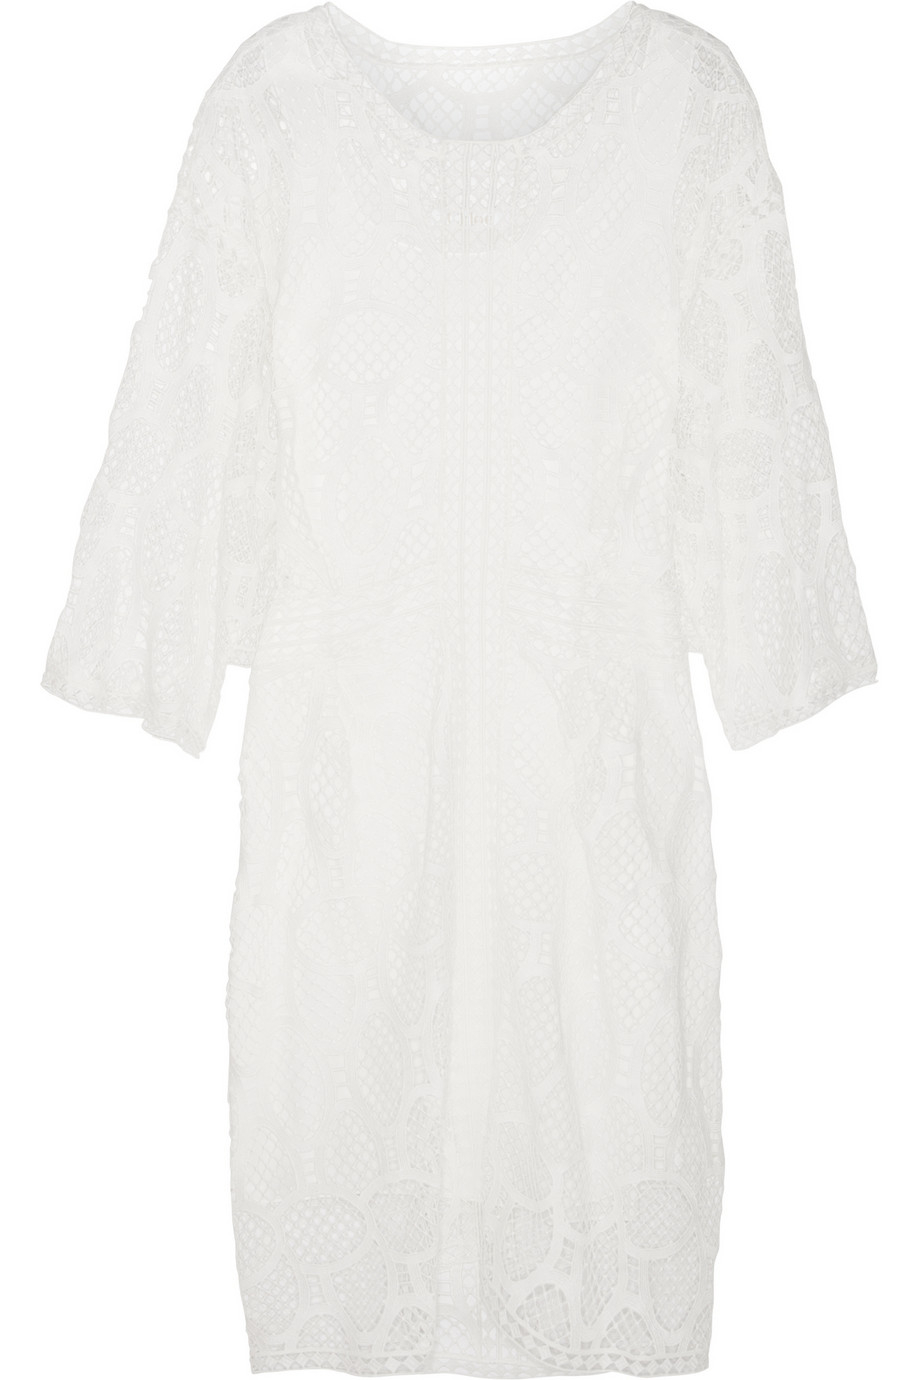 Lyst - Chloé Crocheted Lace Dress in White